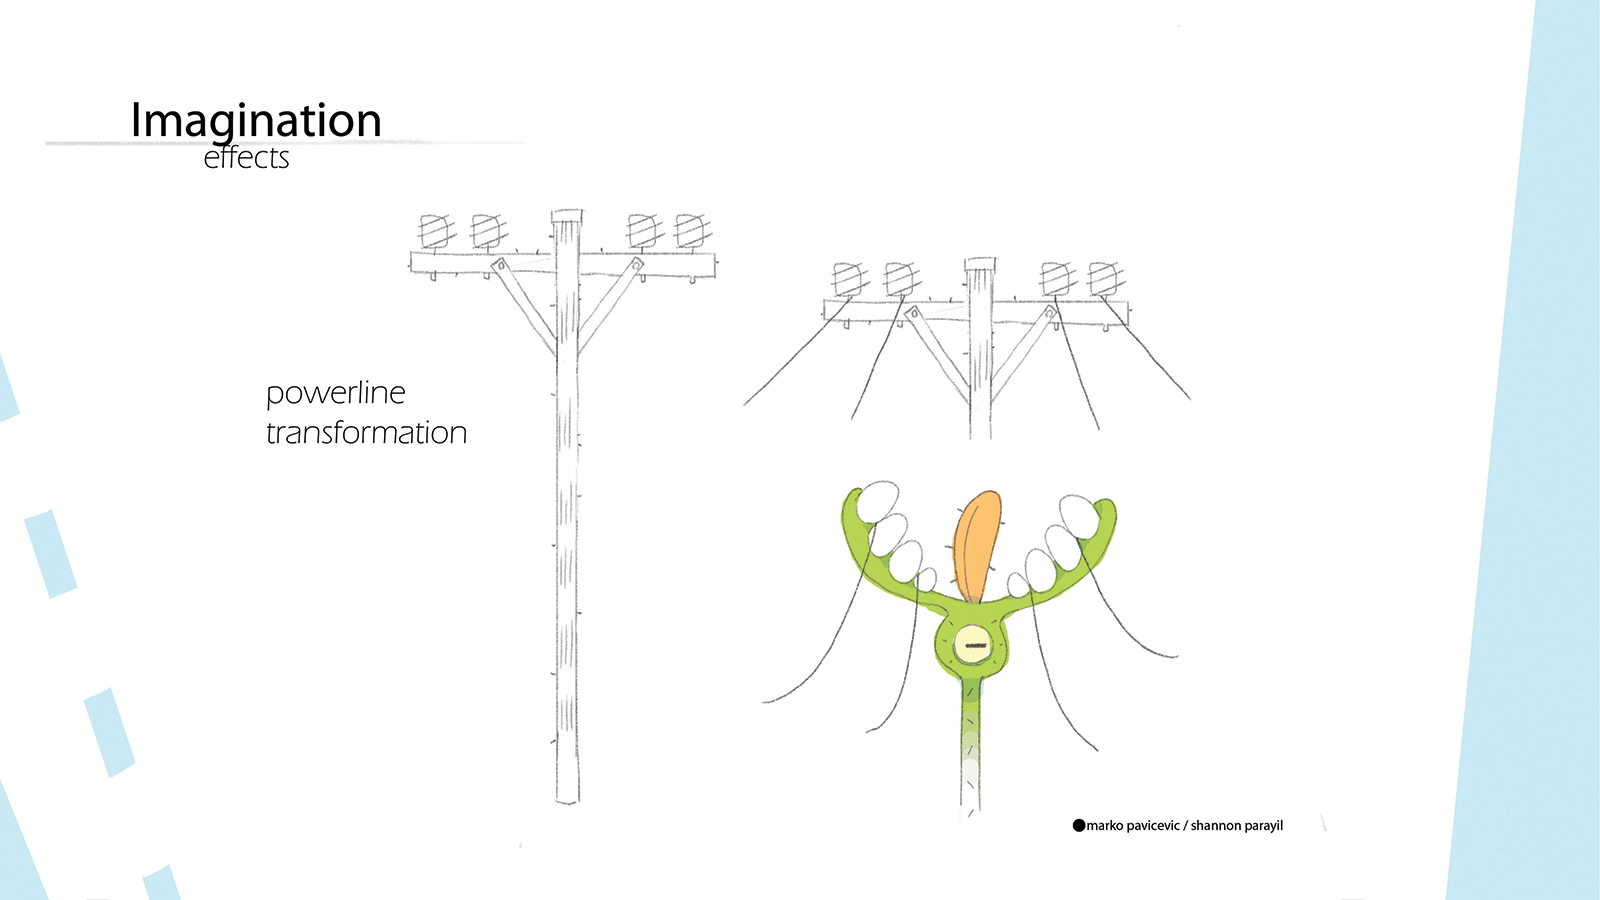 Sketch of a telephone pole turning into an imaginary creature.